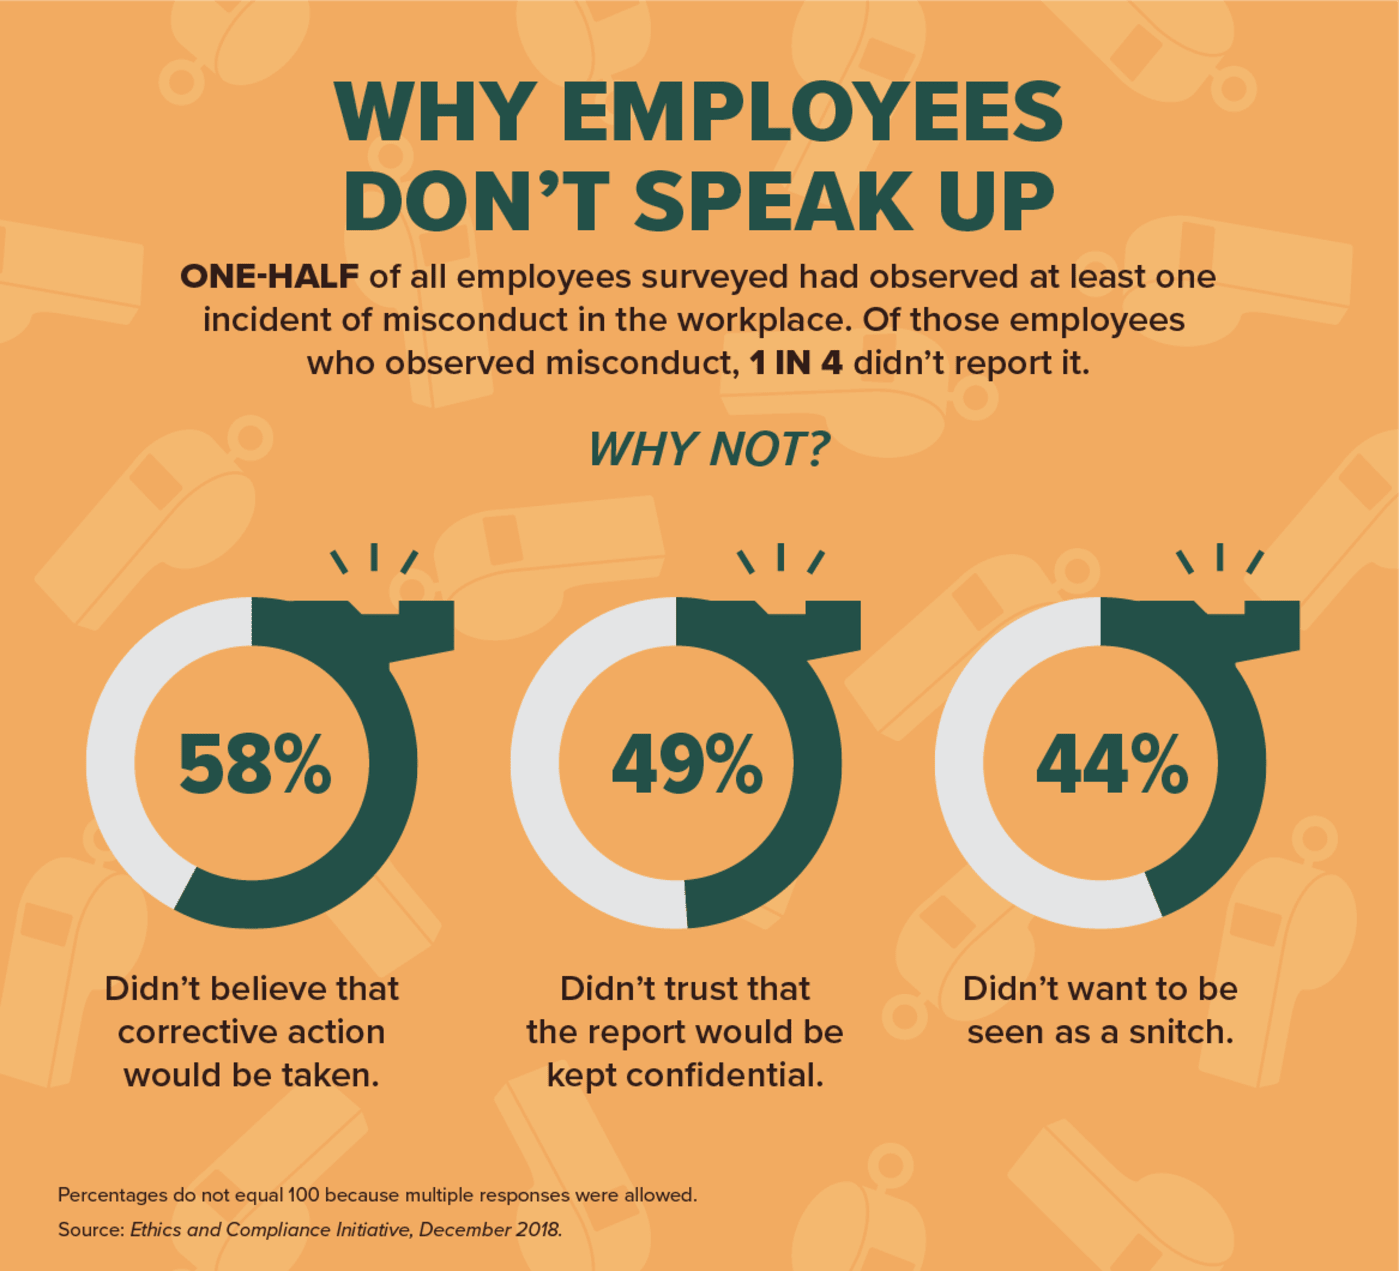 Why Employees Don't Speak Up